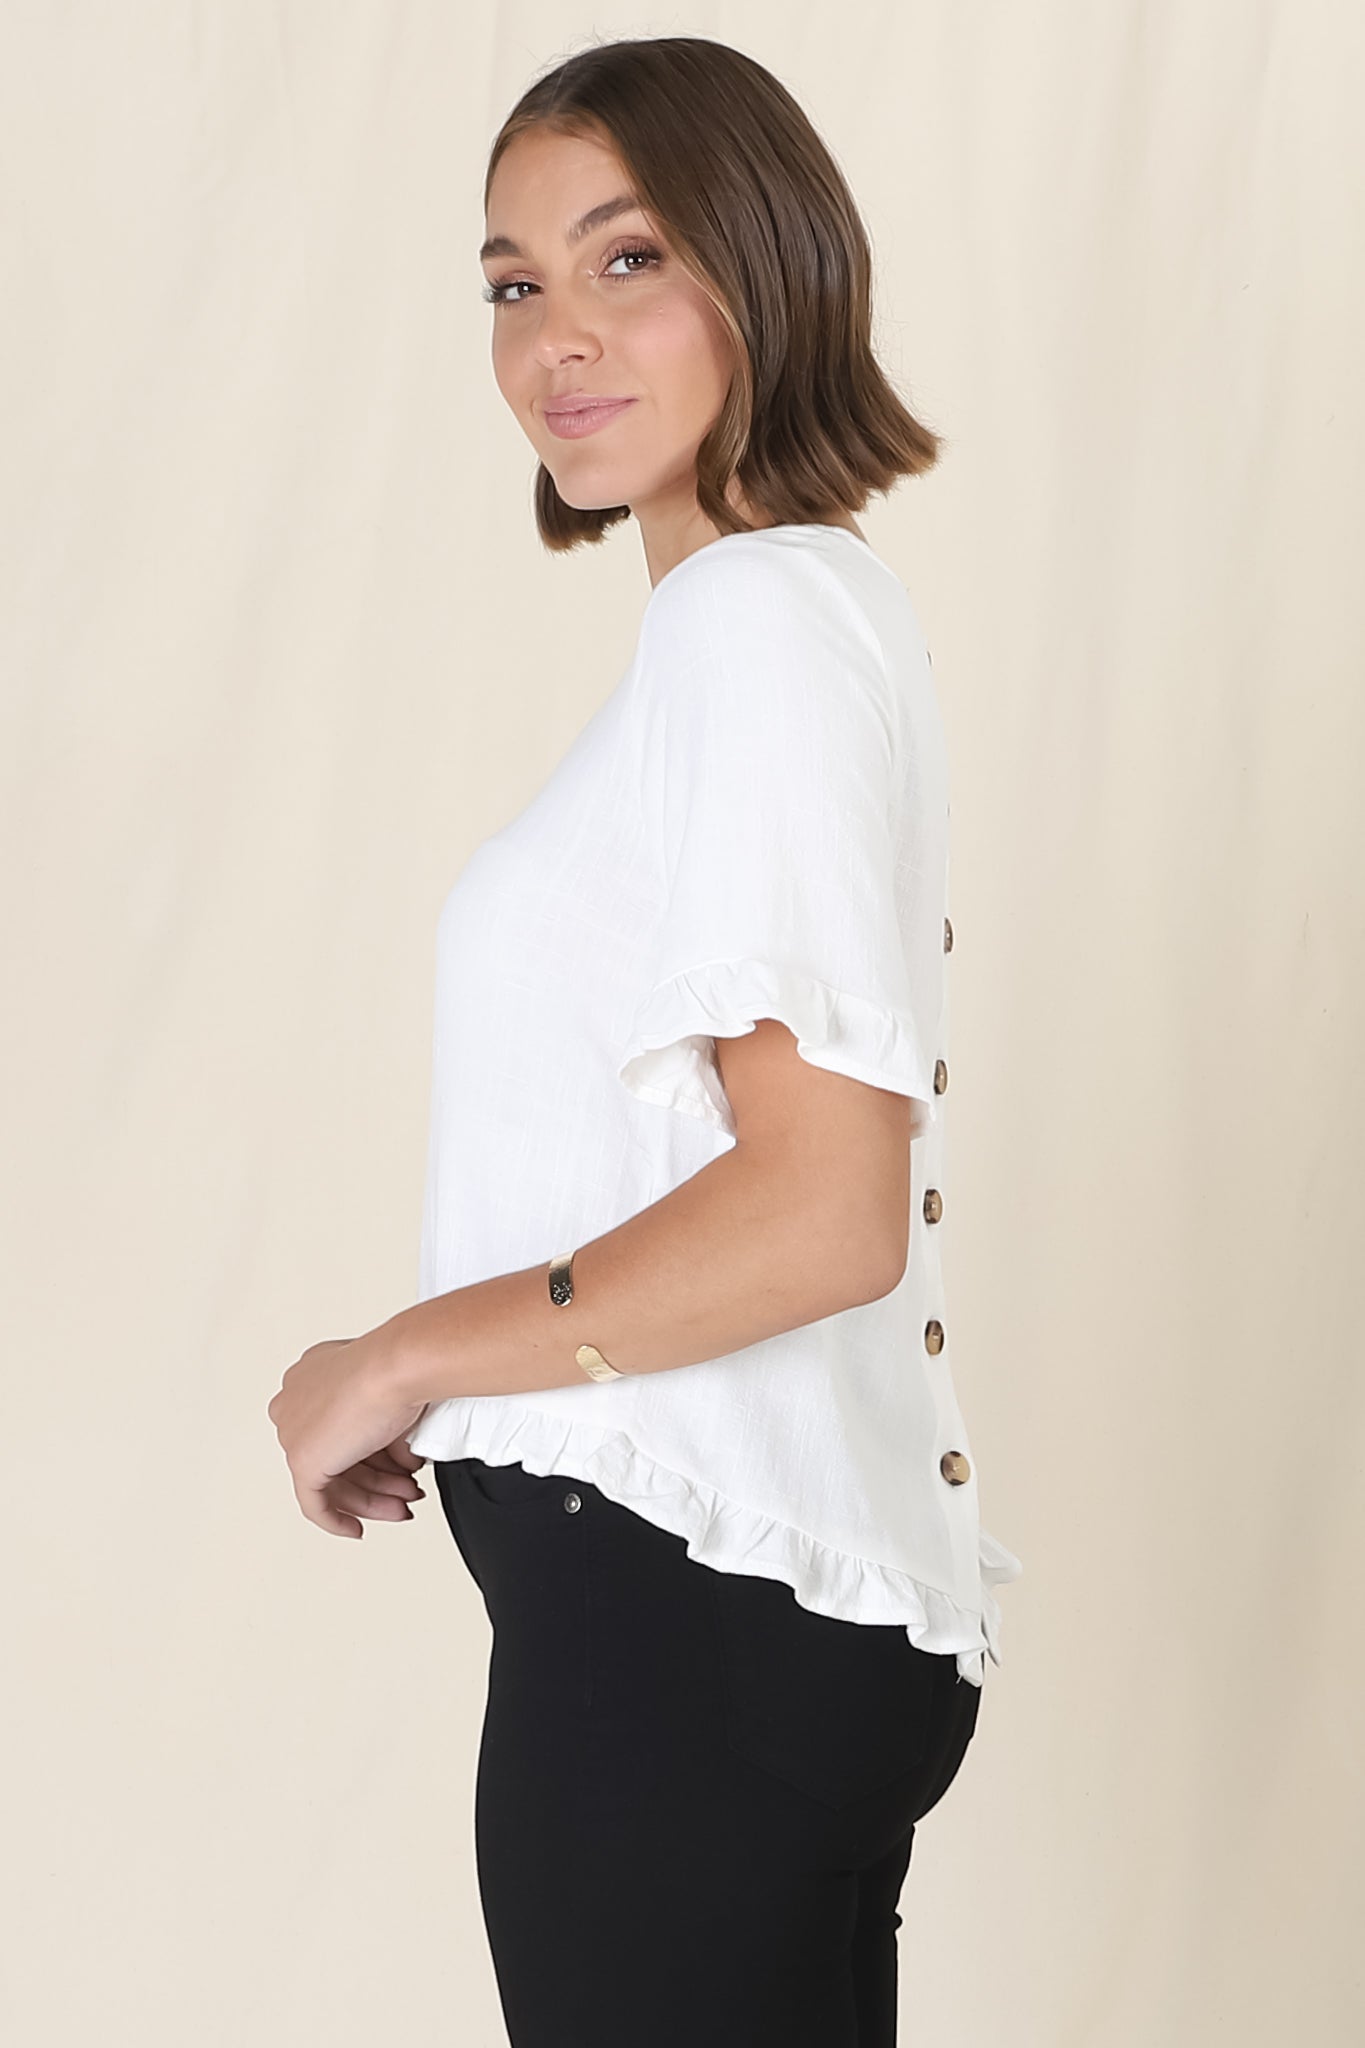 Adria Top - Frill High-Low Hem with Wooden Button Down Back Top in White